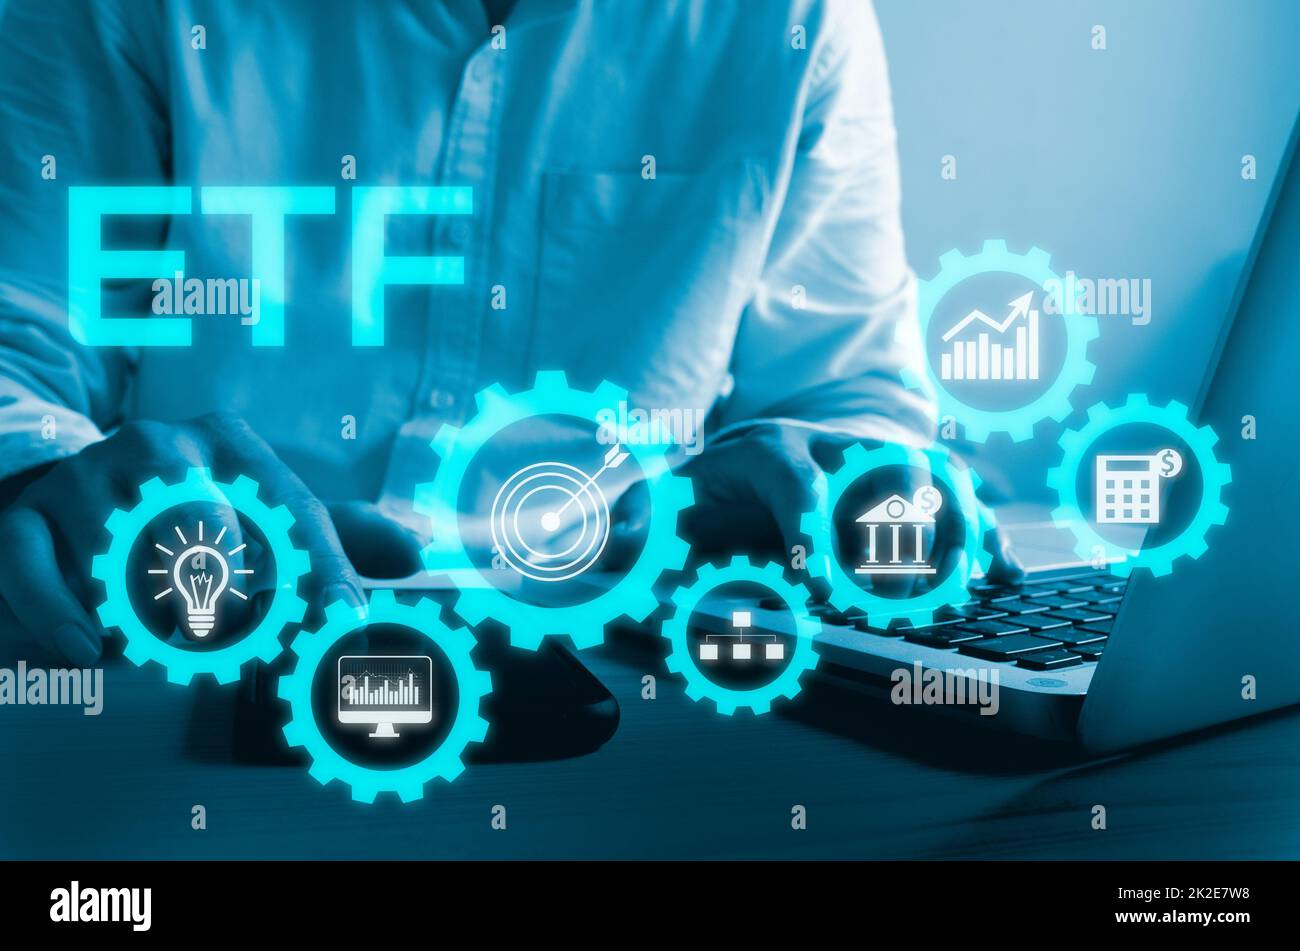 hand touching screen digital virtual futuristic interface icon ETF Exchange Traded Fund. Business stock market finance Index Concept. Stock Photo